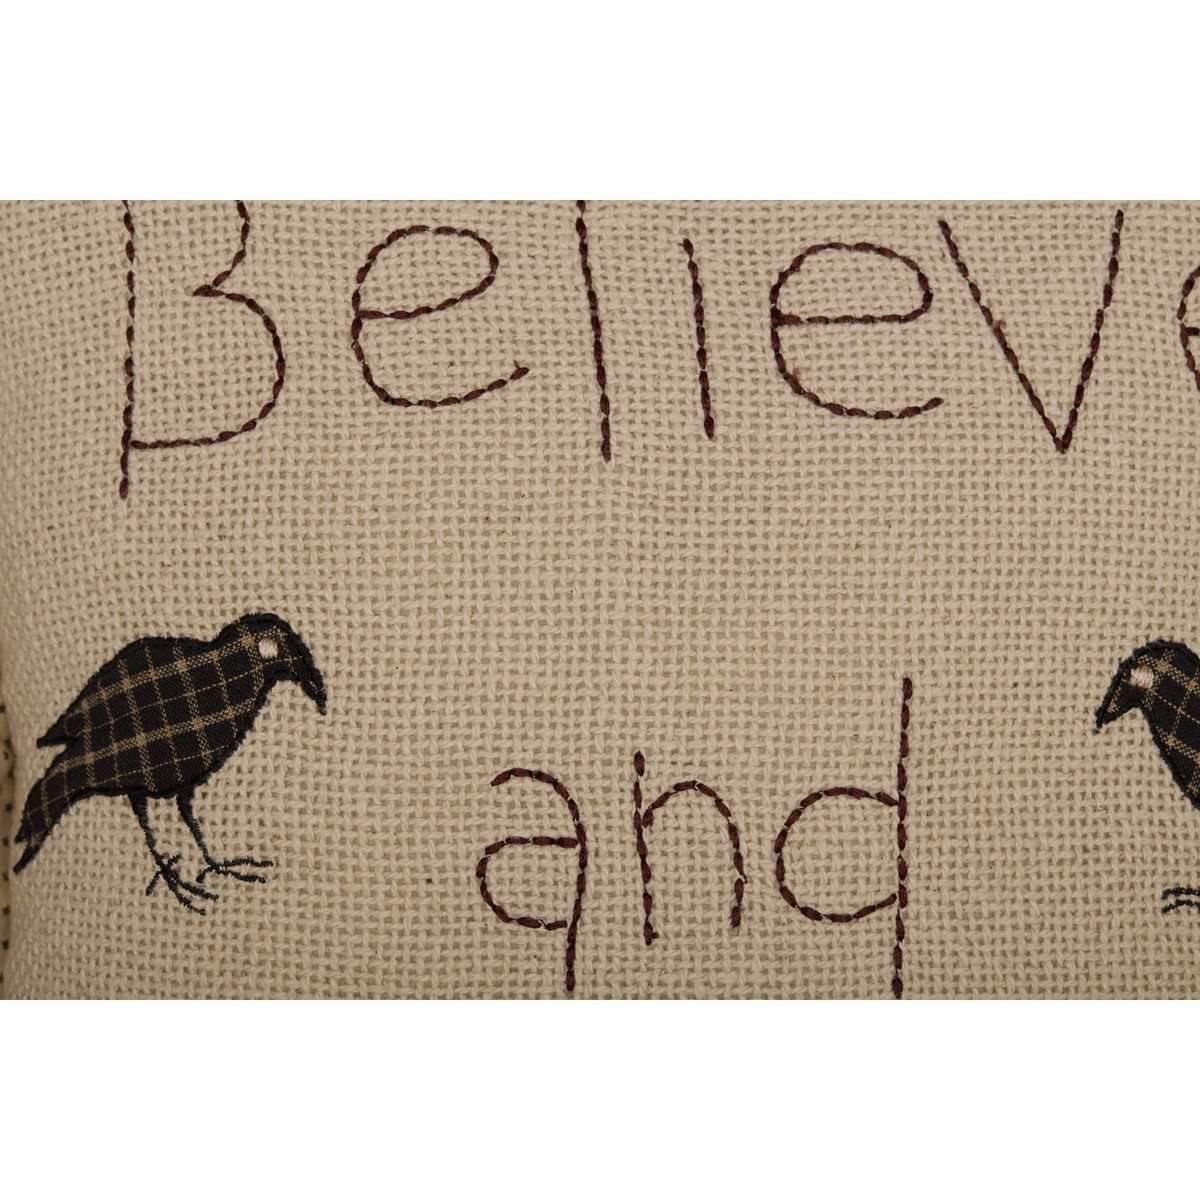 Kettle Grove Believe and Receive Pillow 12x12 VHC Brands zoom